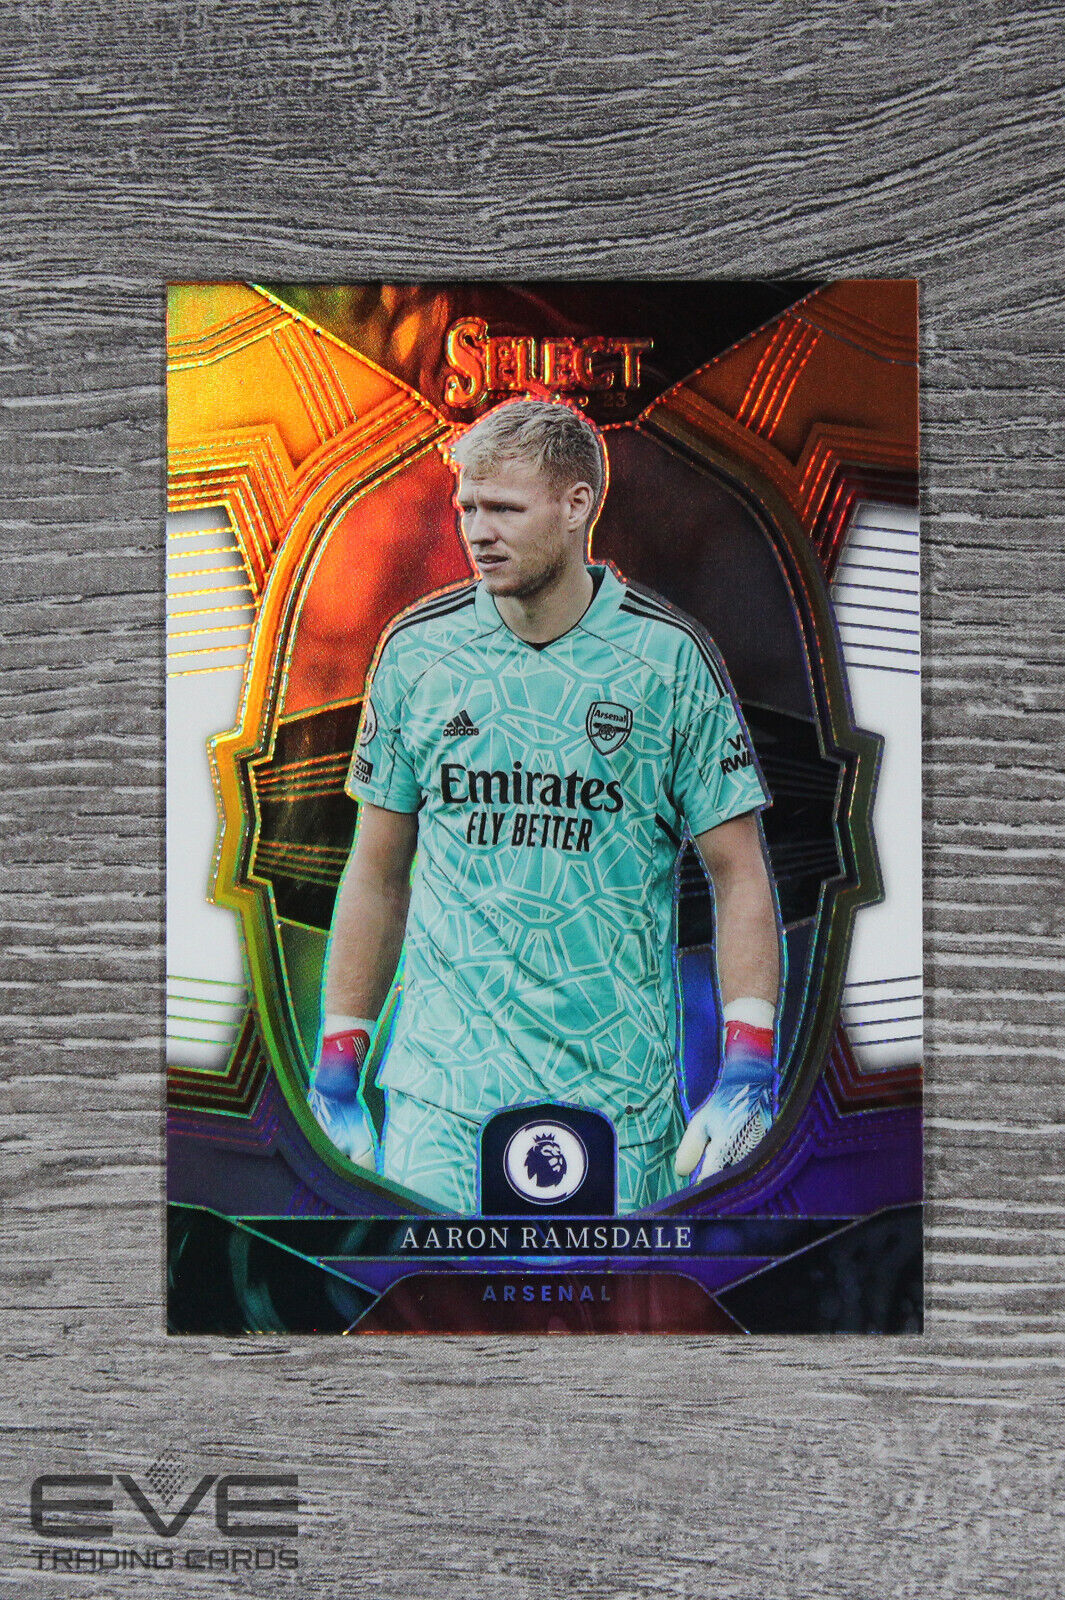 2022-23 Panini Select EPL Soccer Card #7 Aaron Ramsdale Multicolour Prizm NM/M